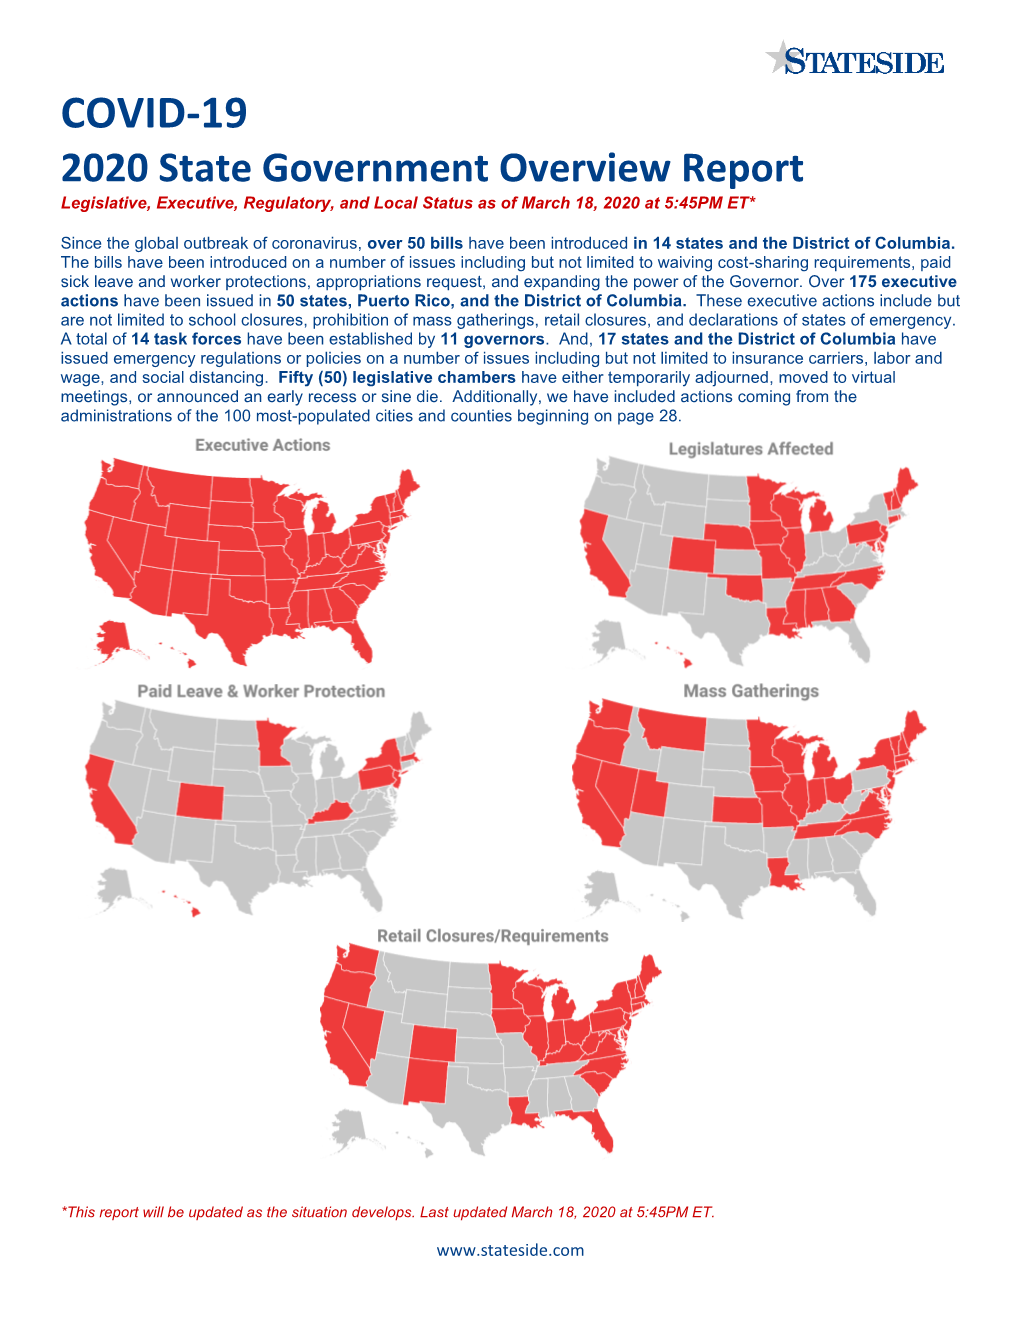 COVID-19 2020 State Government Overview Report Legislative, Executive, Regulatory, and Local Status As of March 18, 2020 at 5:45PM ET*